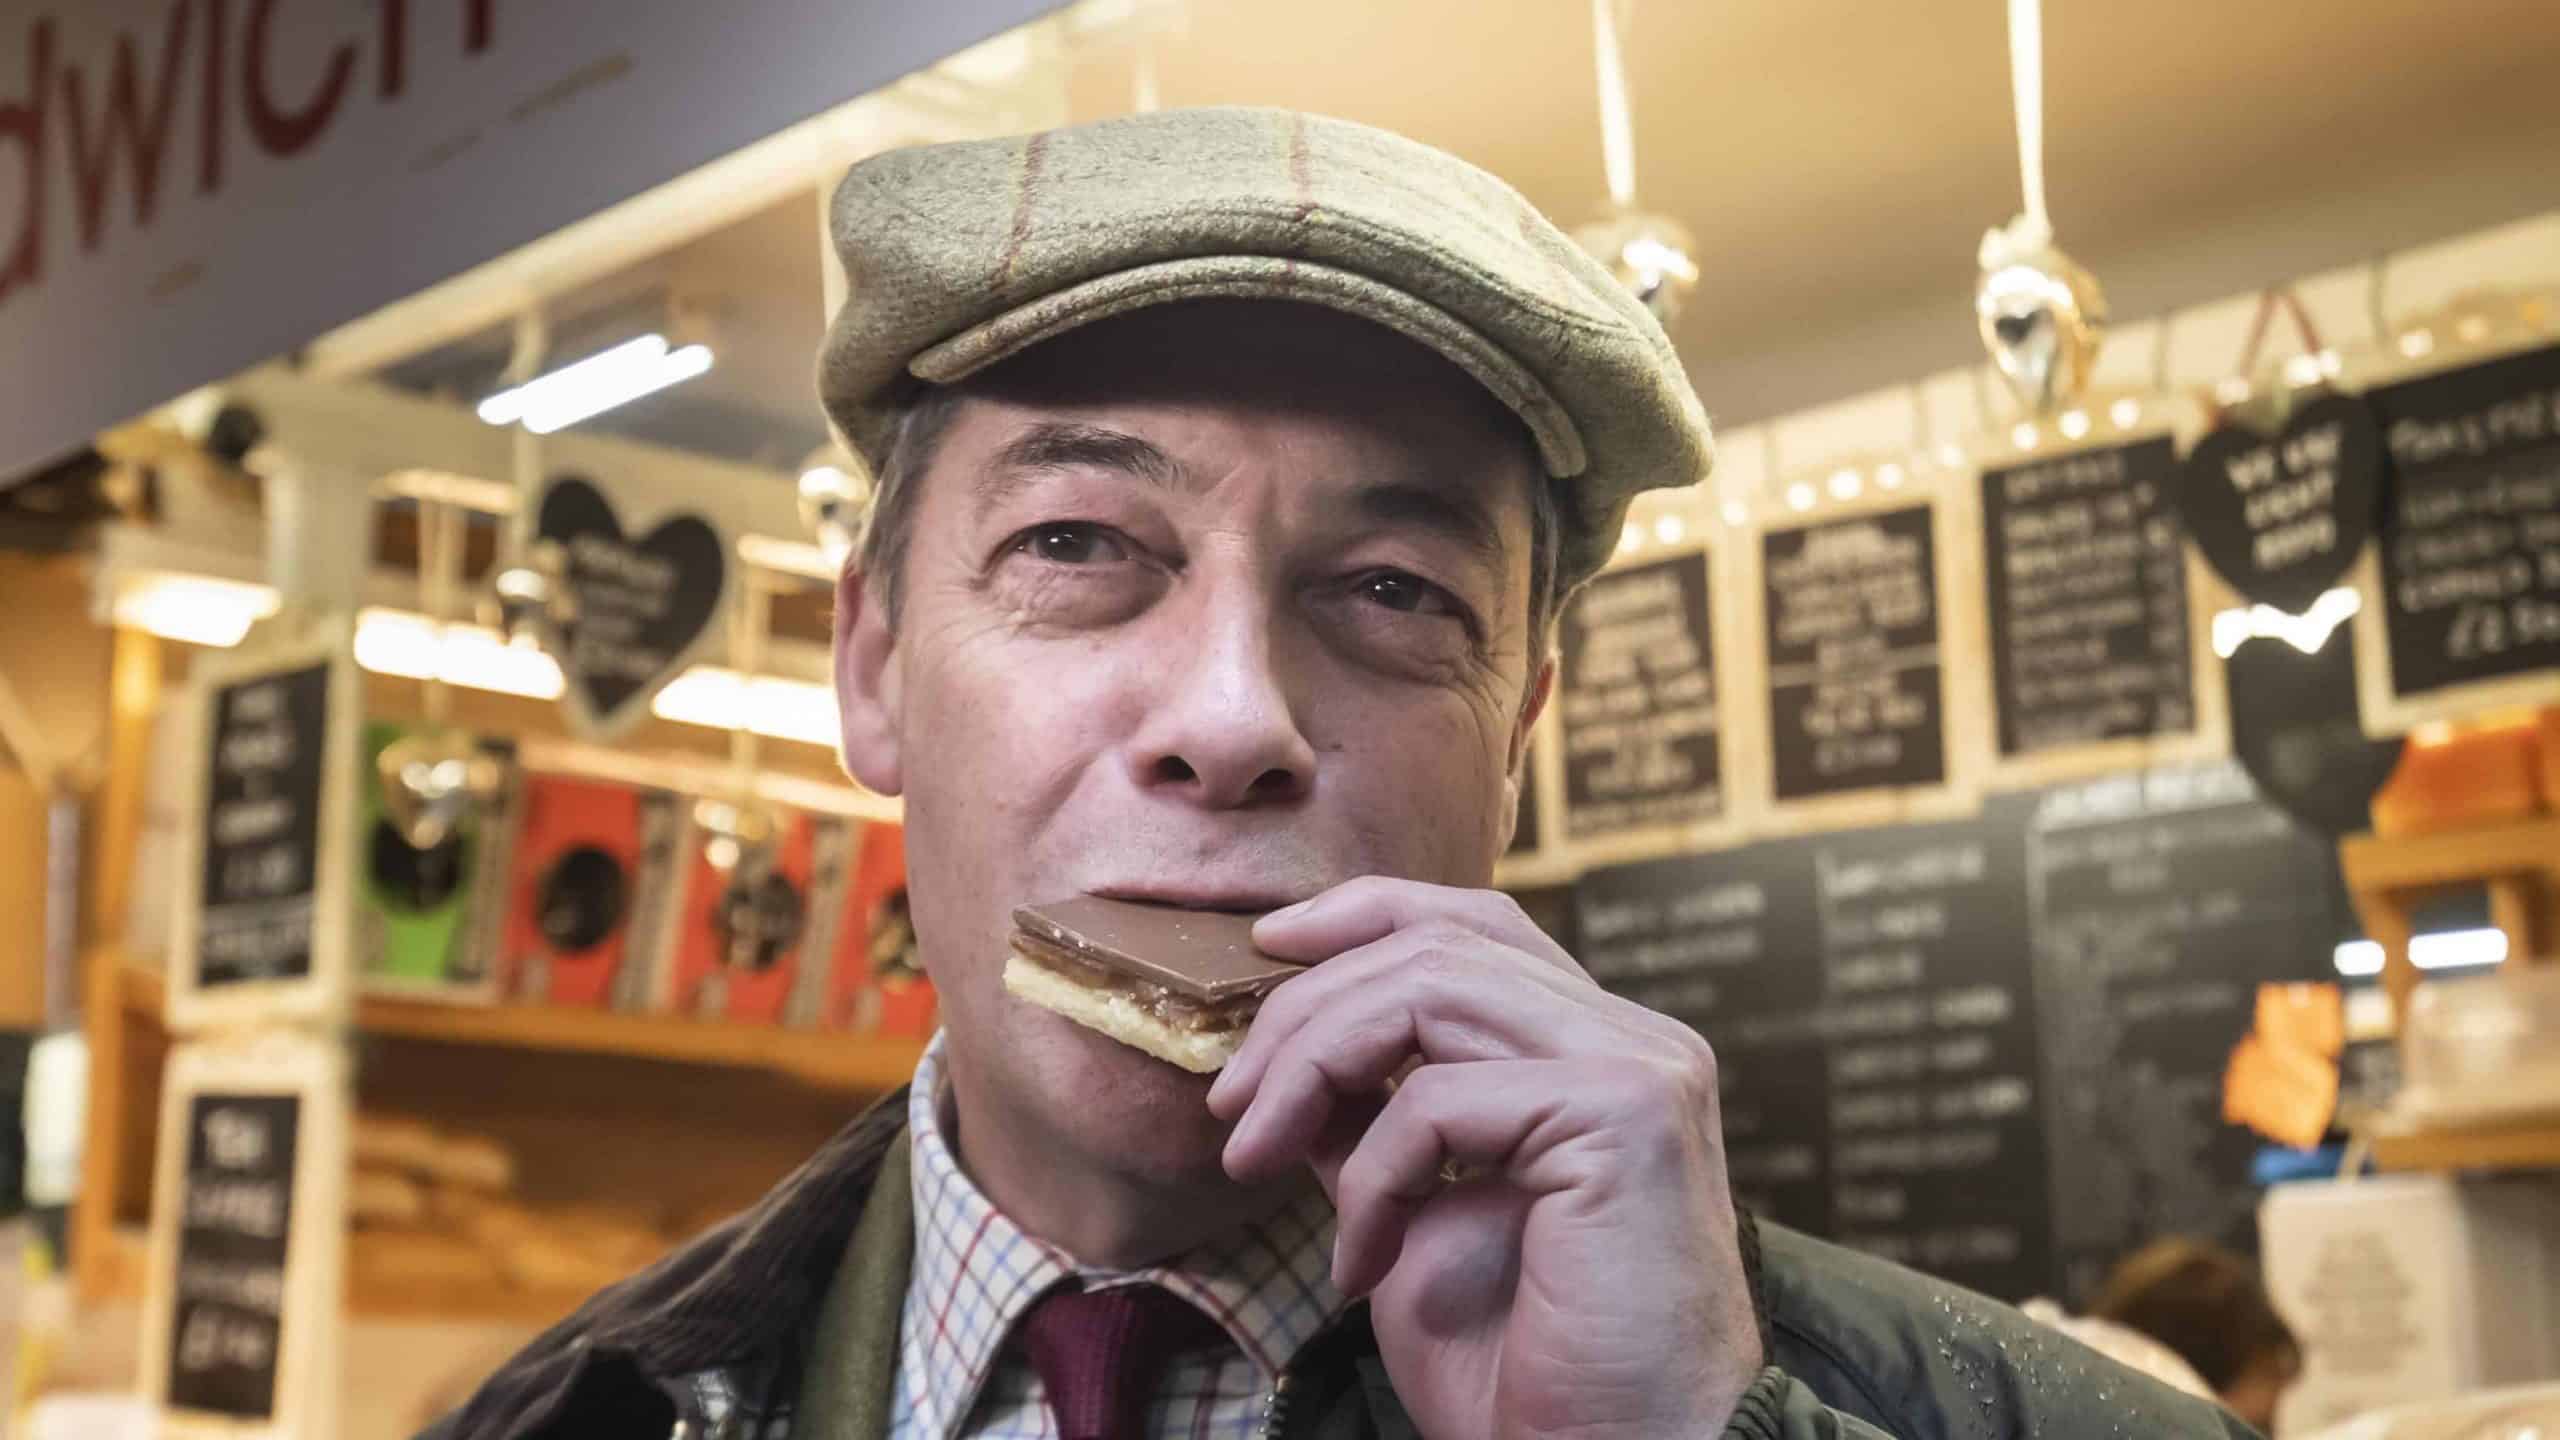 Nigel Farage’s Brexit party handed Labour 25 seats in 2019 election